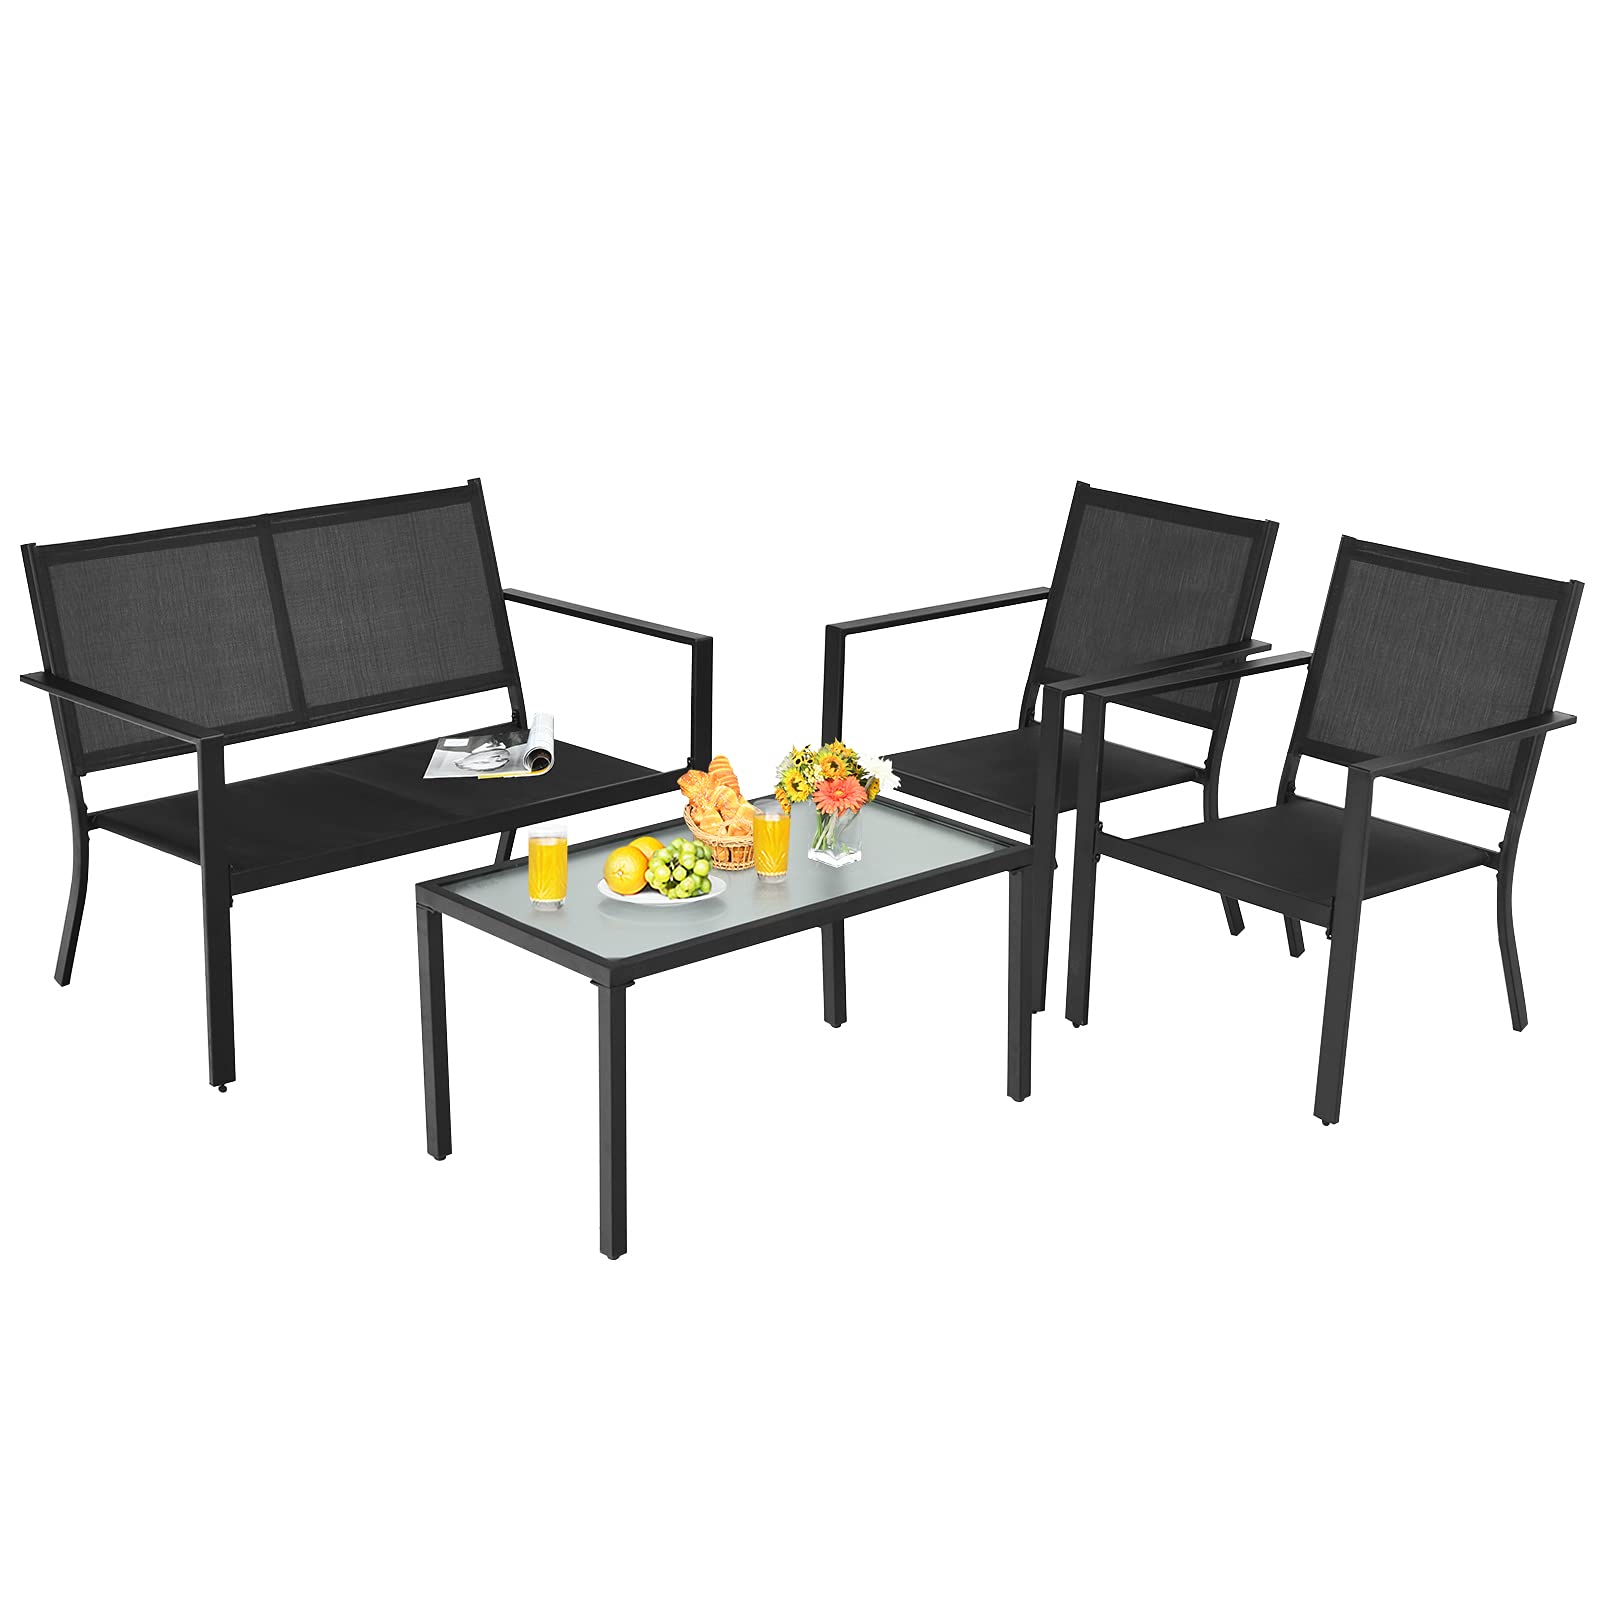 Giantex 4 Pieces Patio Furniture Set, Outdoor Conversation Set, Loveseat Bench with 2 Patio Chairs & Tempered Glass Coffee Table